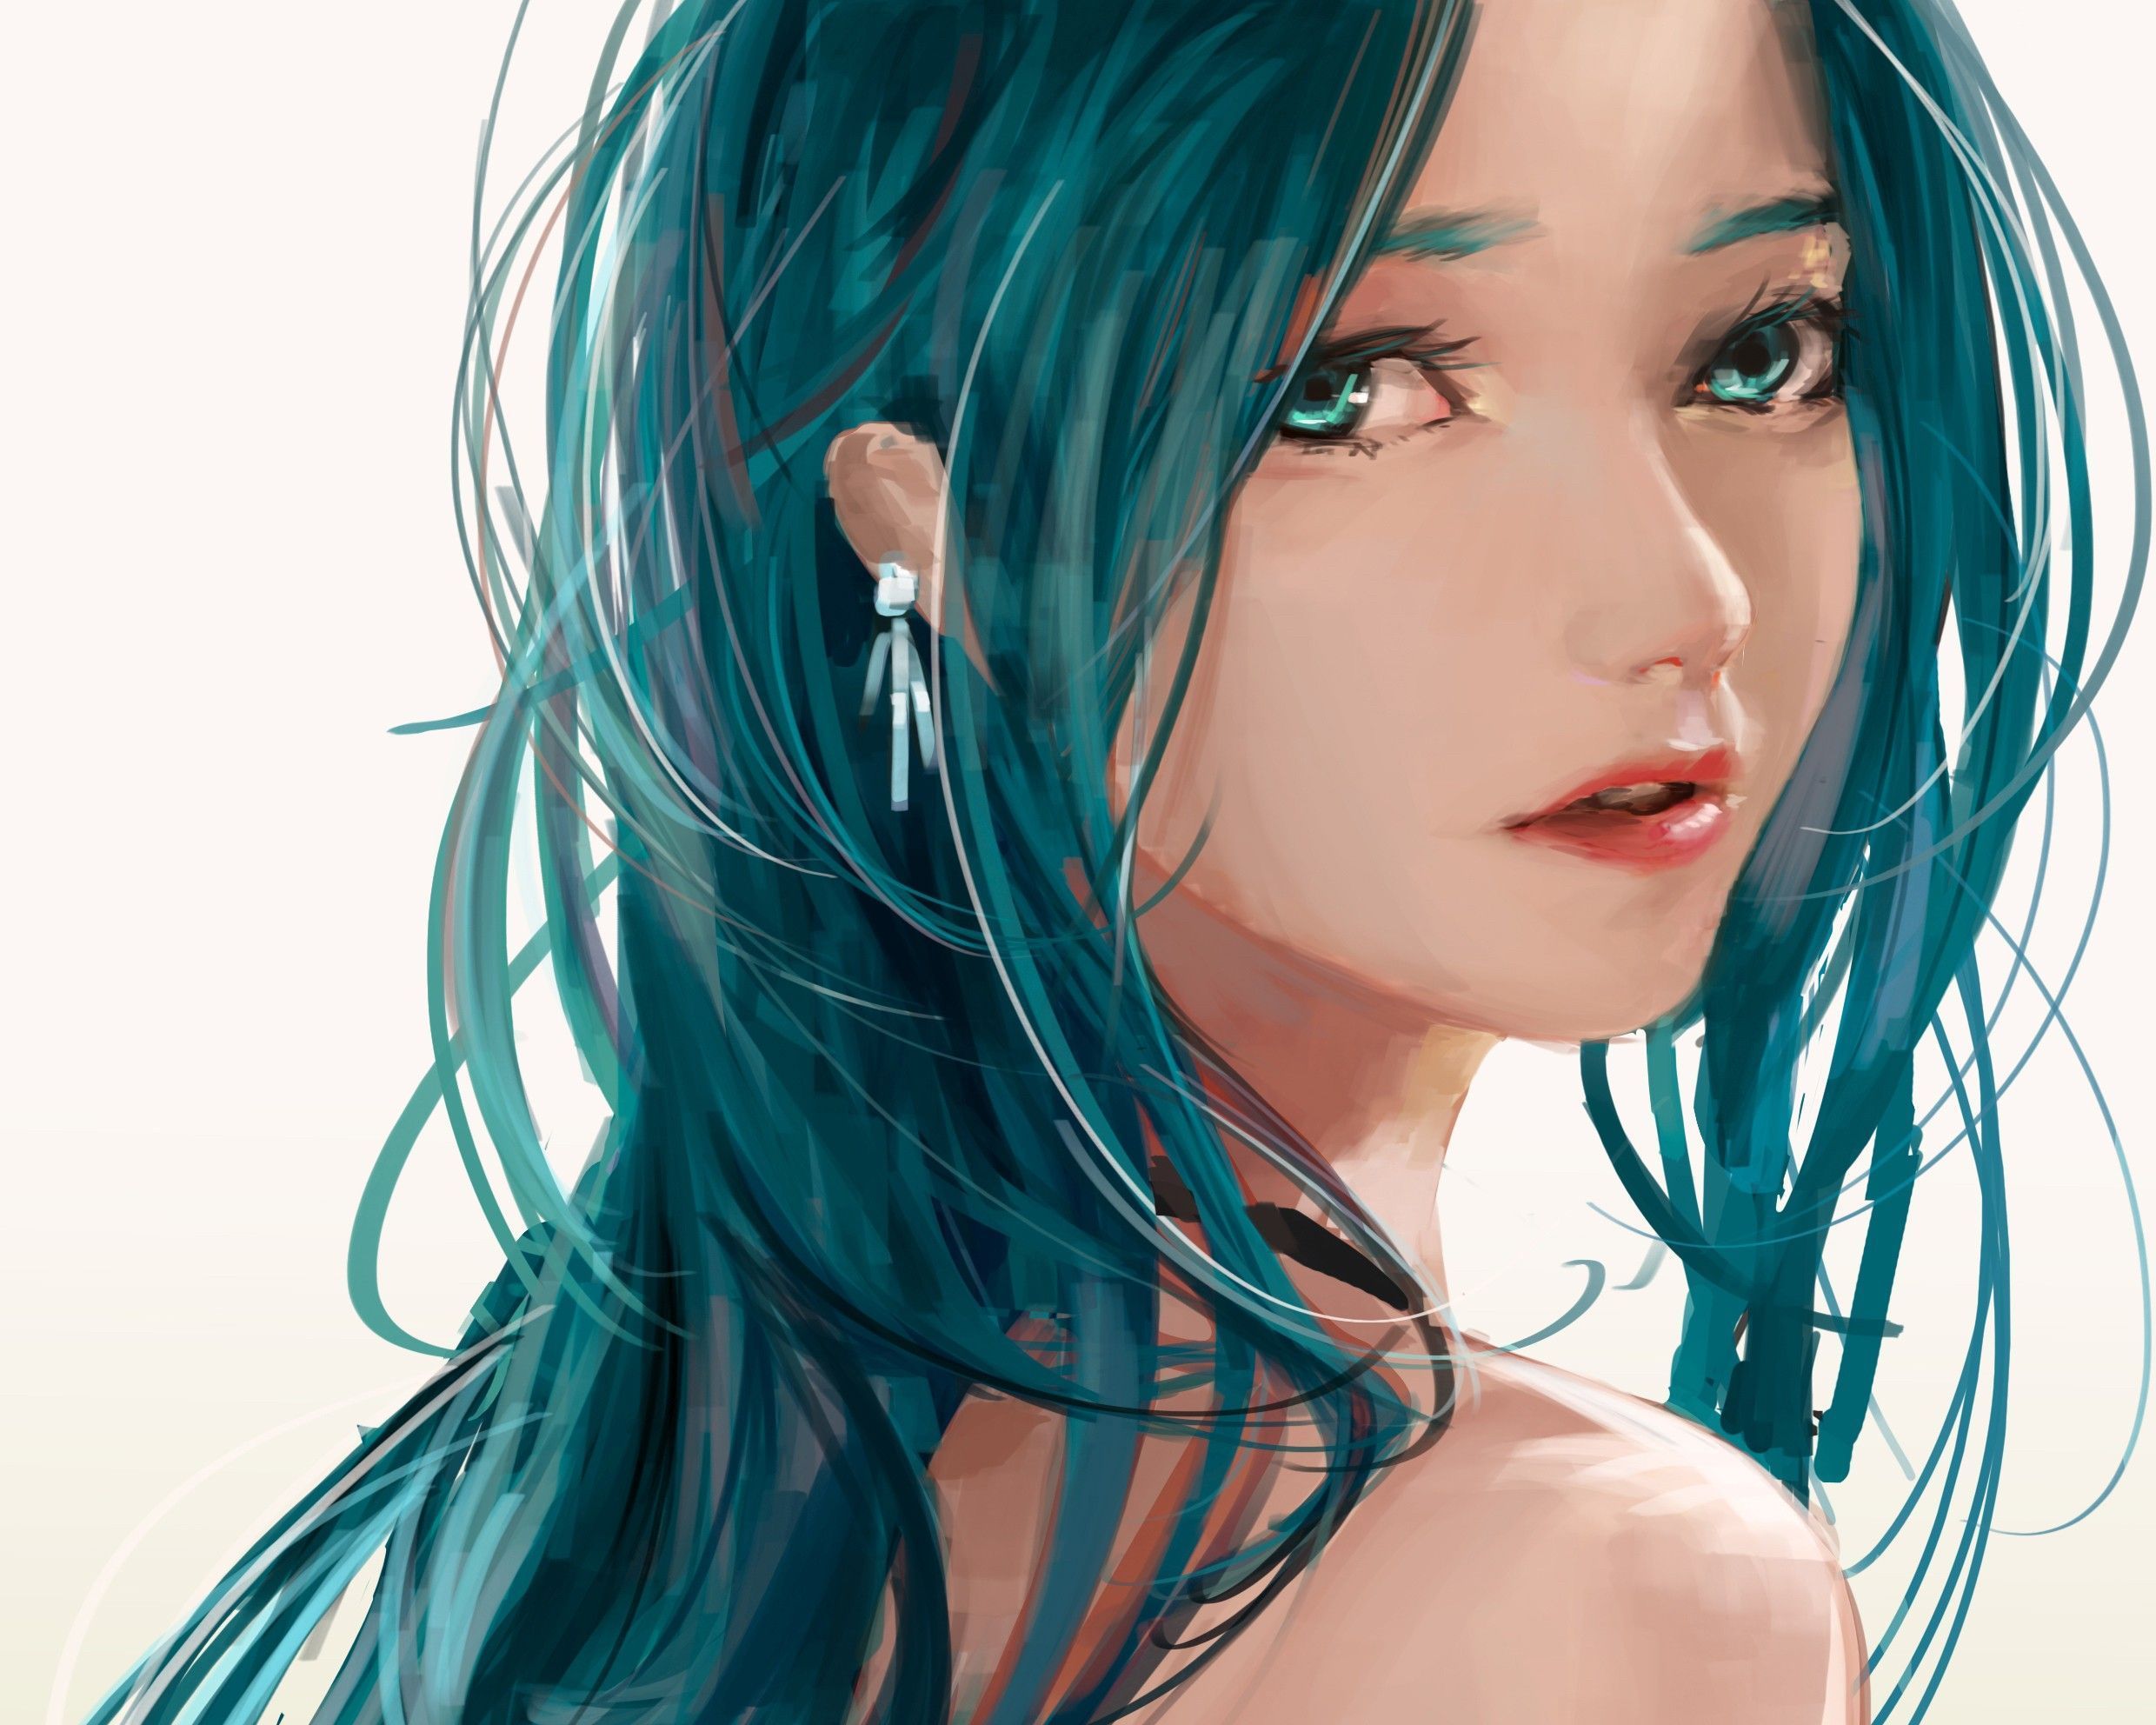 1. "Teal Hair Girl with Blue Eyes" by @hairbykaseyoh - wide 3